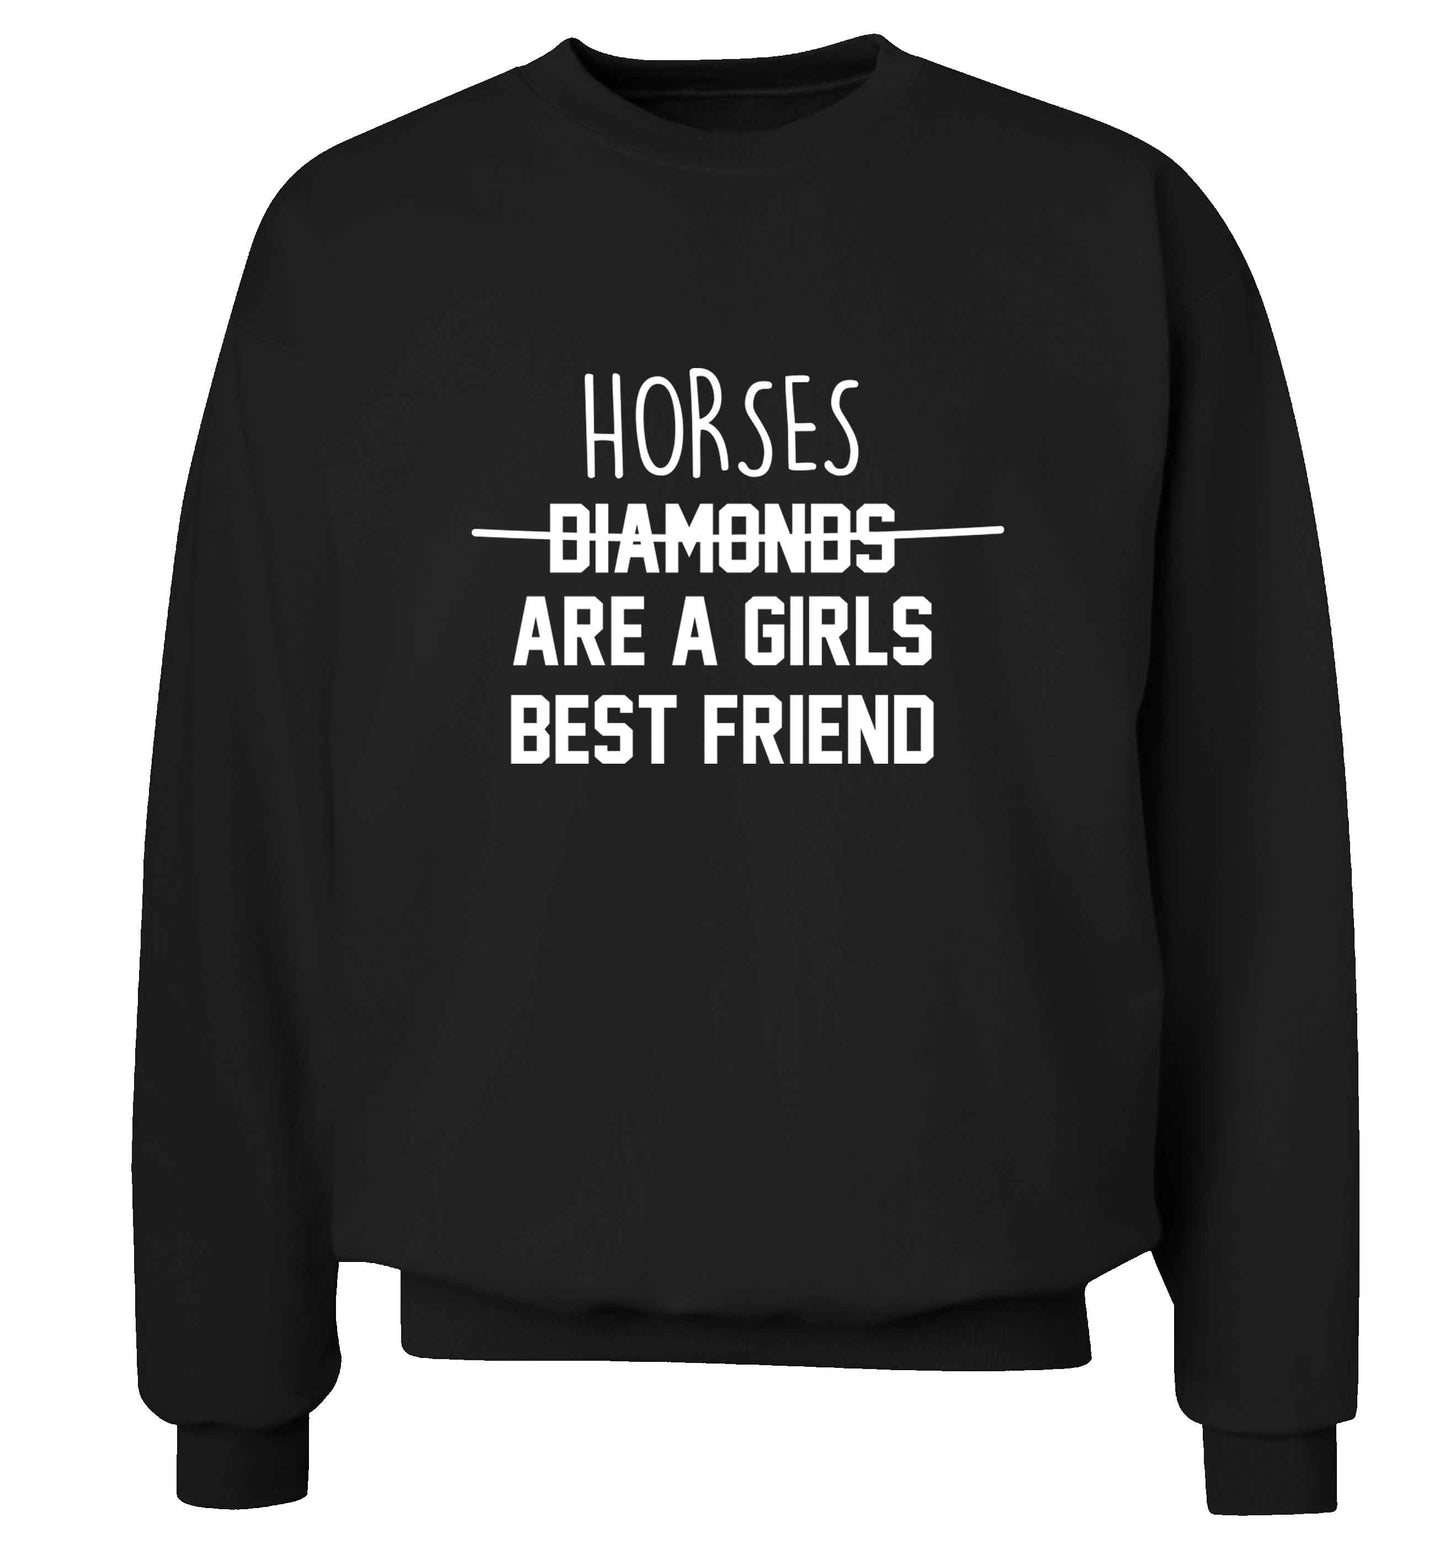 Horses are a girls best friend adult's unisex black sweater 2XL